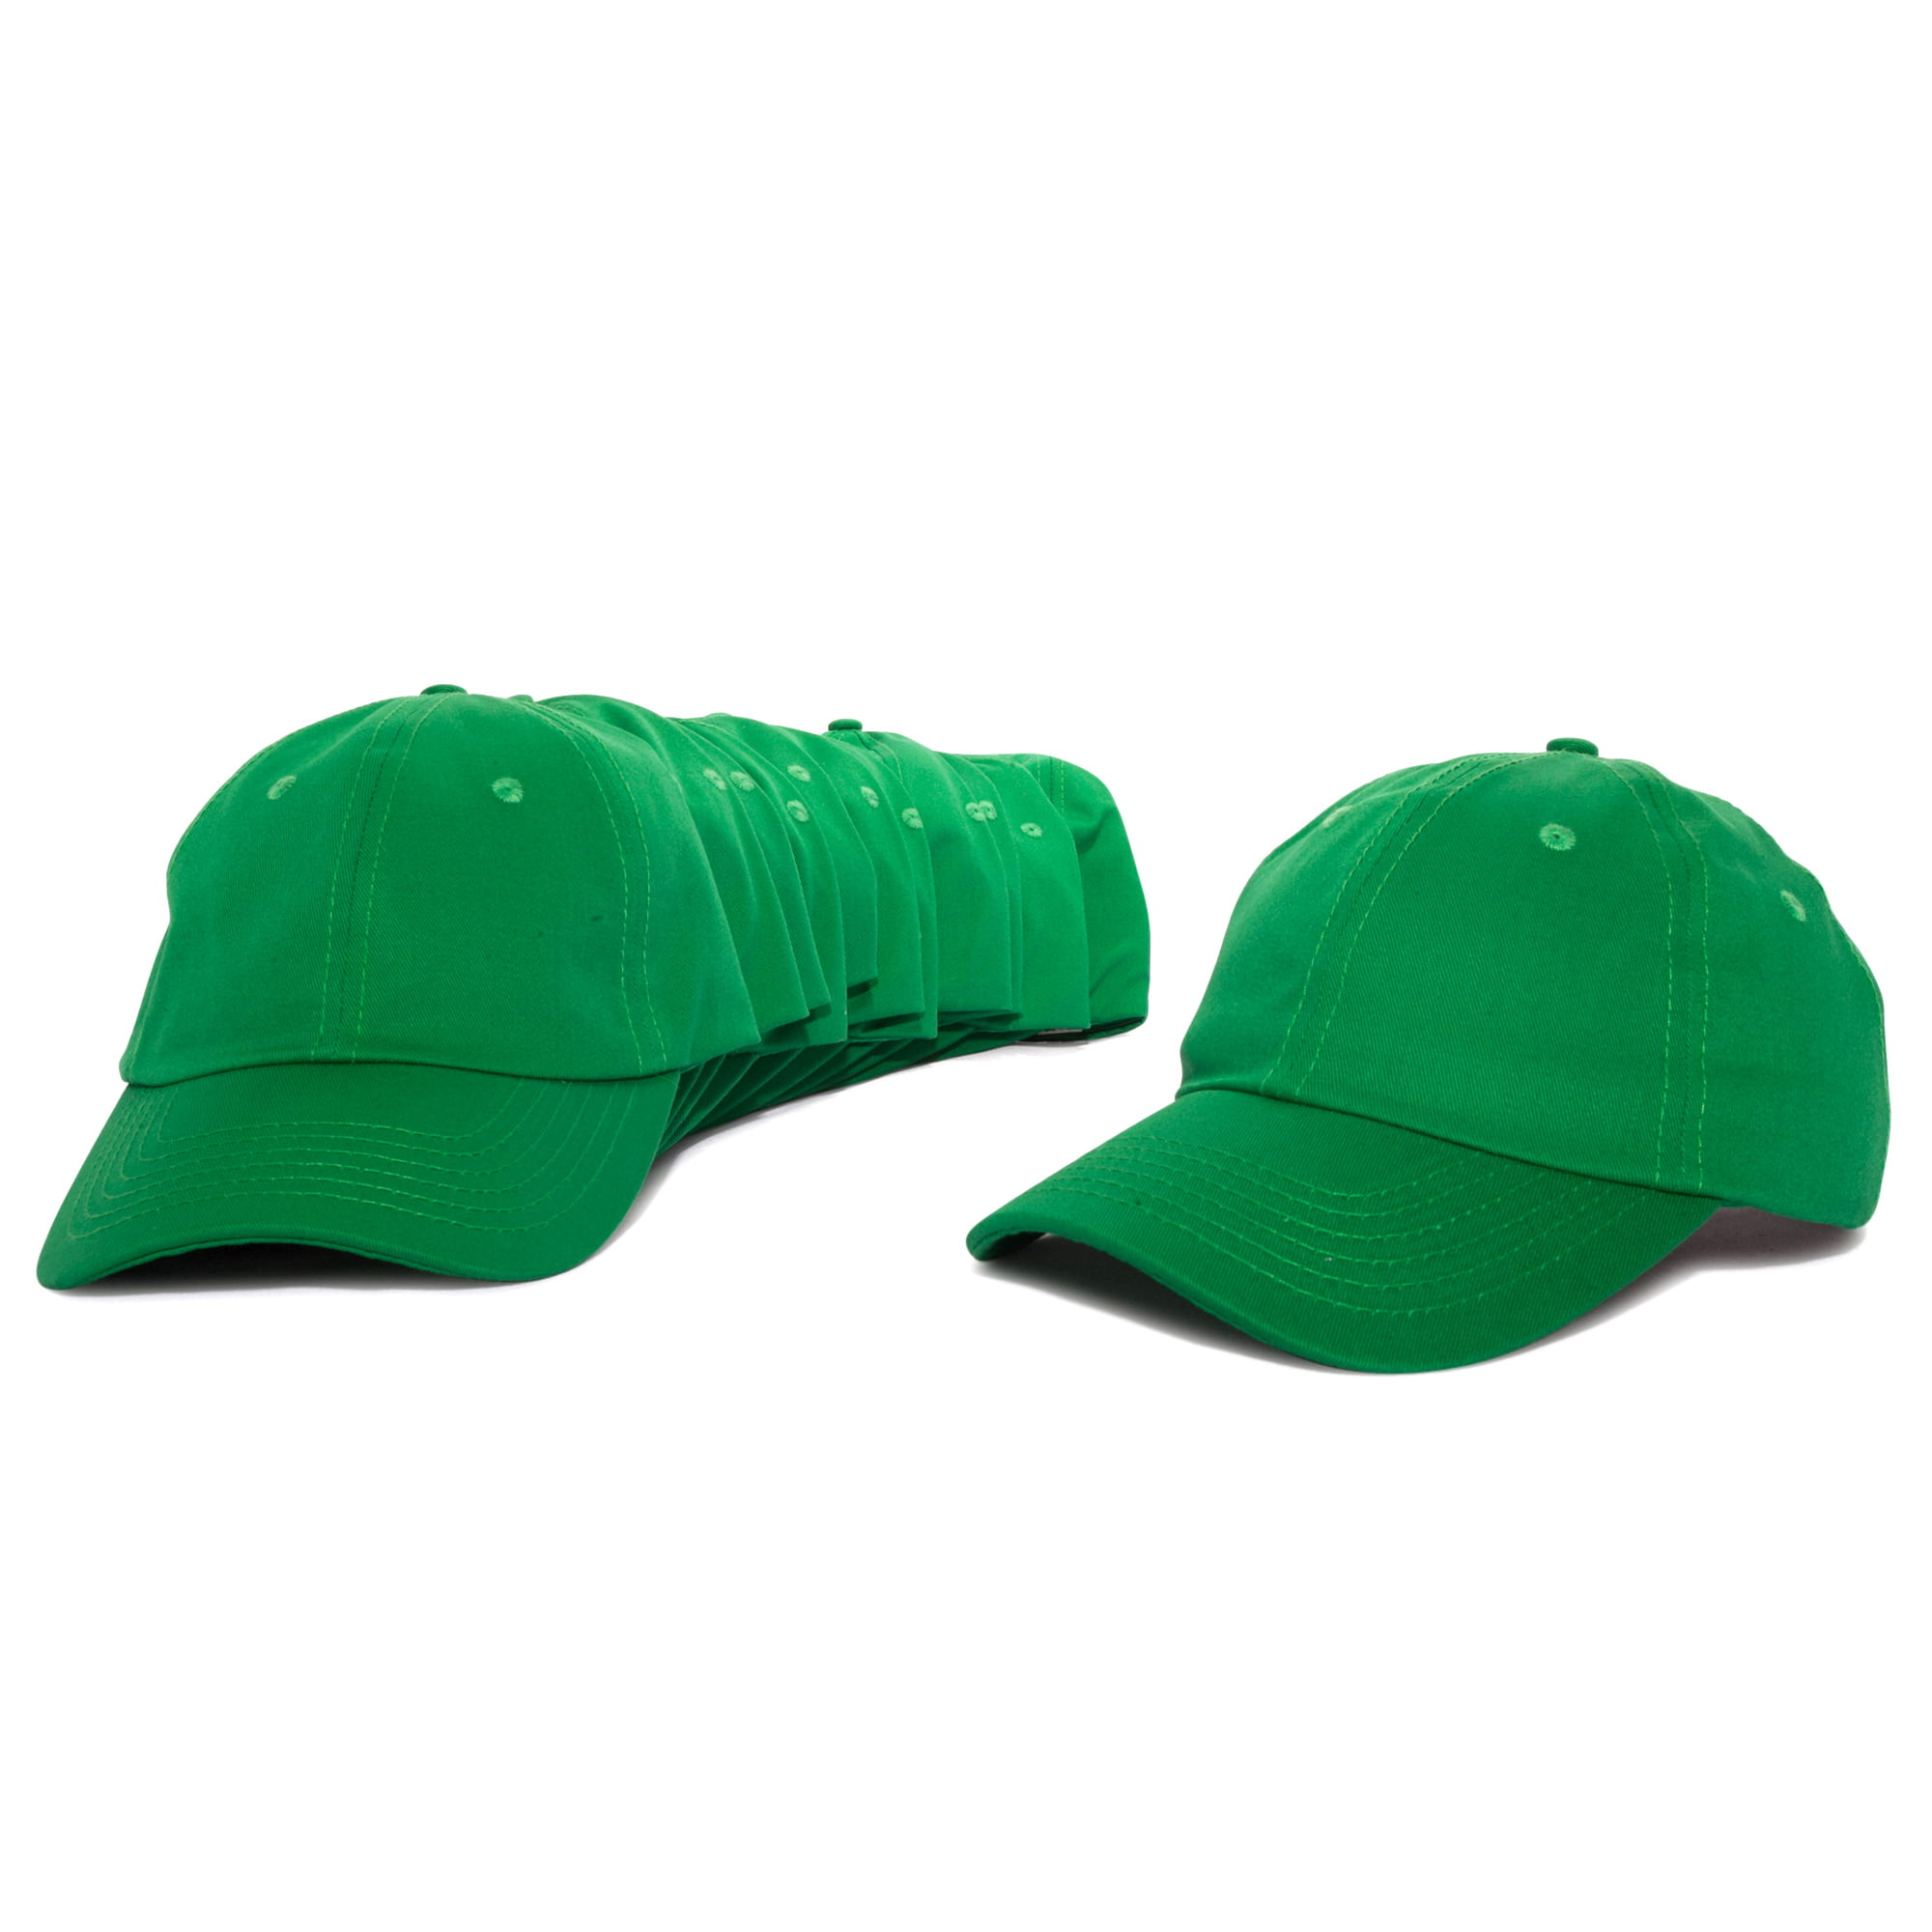 New Two-Tone Blank Plain High Fashion Style Men and Womens Dad Hat Green & Mint